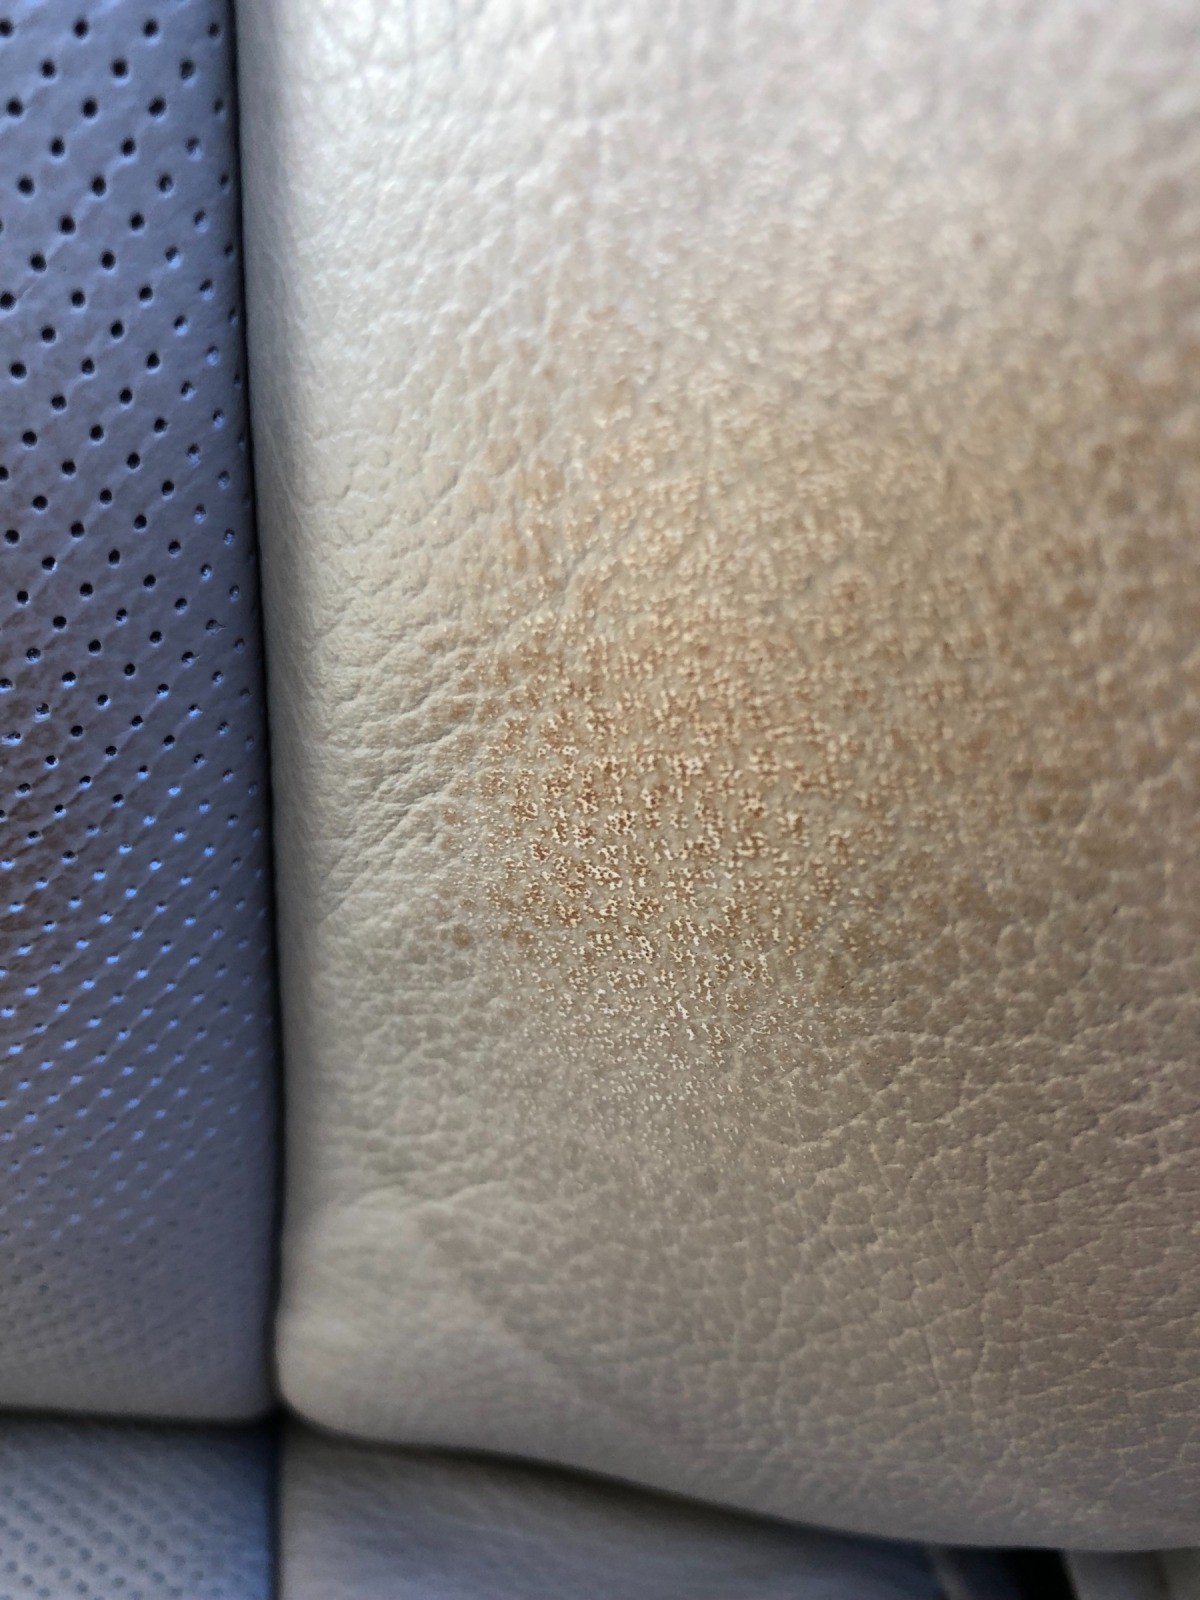 Stain On Leather Car Seat From Belt, How To Remove Turmeric Stain From Leather Car Seat